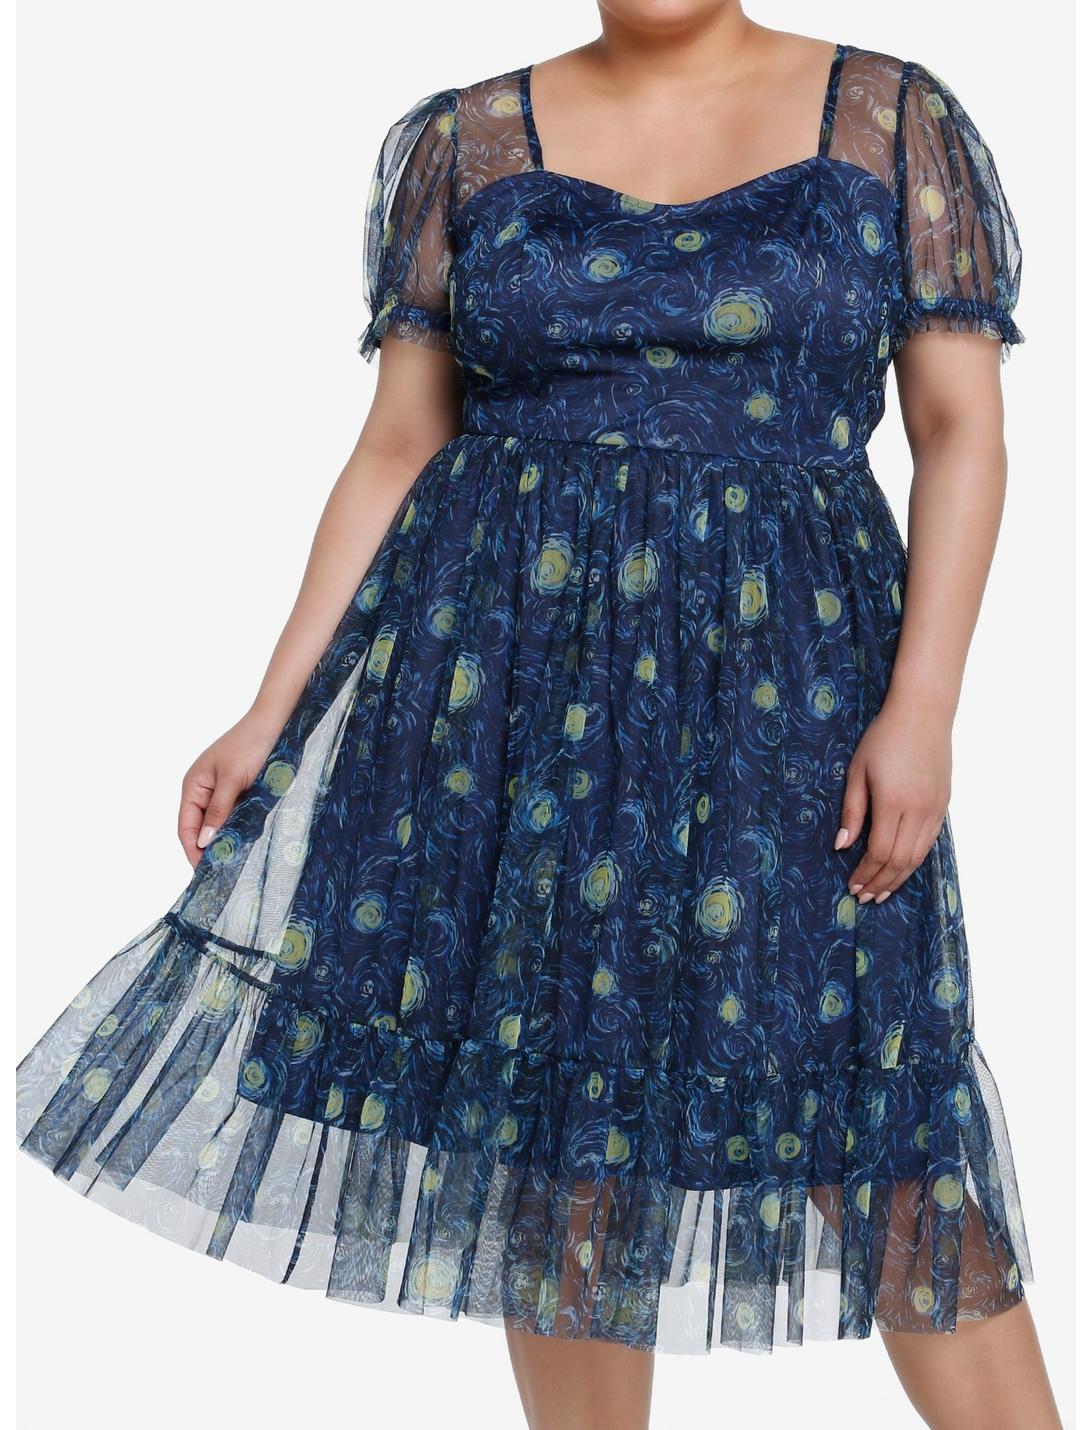 Thorn & Fable Starry Nights Mesh Puff Sleeve Dress Plus Size, STARRY NIGHT, hi-res